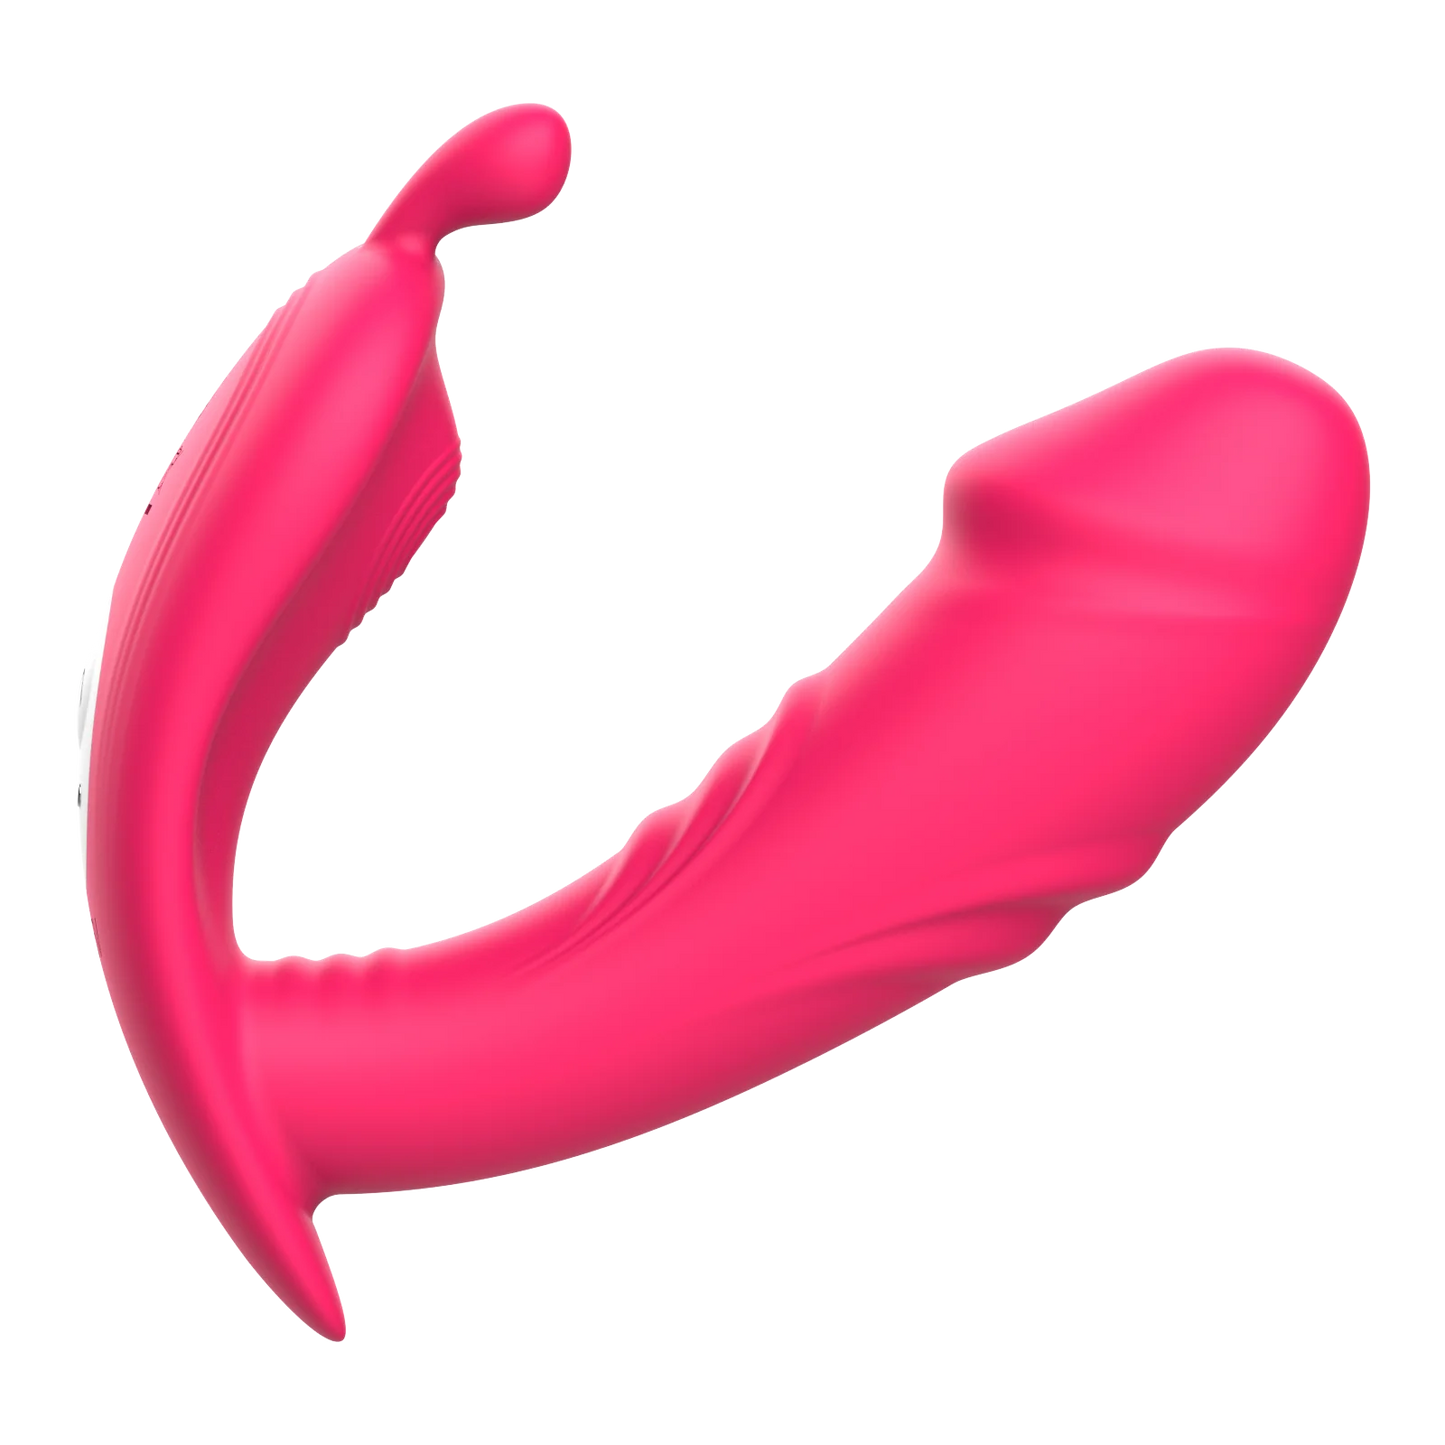 Couples Panty Vibrator USB Rechargeable Food Grade Silicone WERC-50